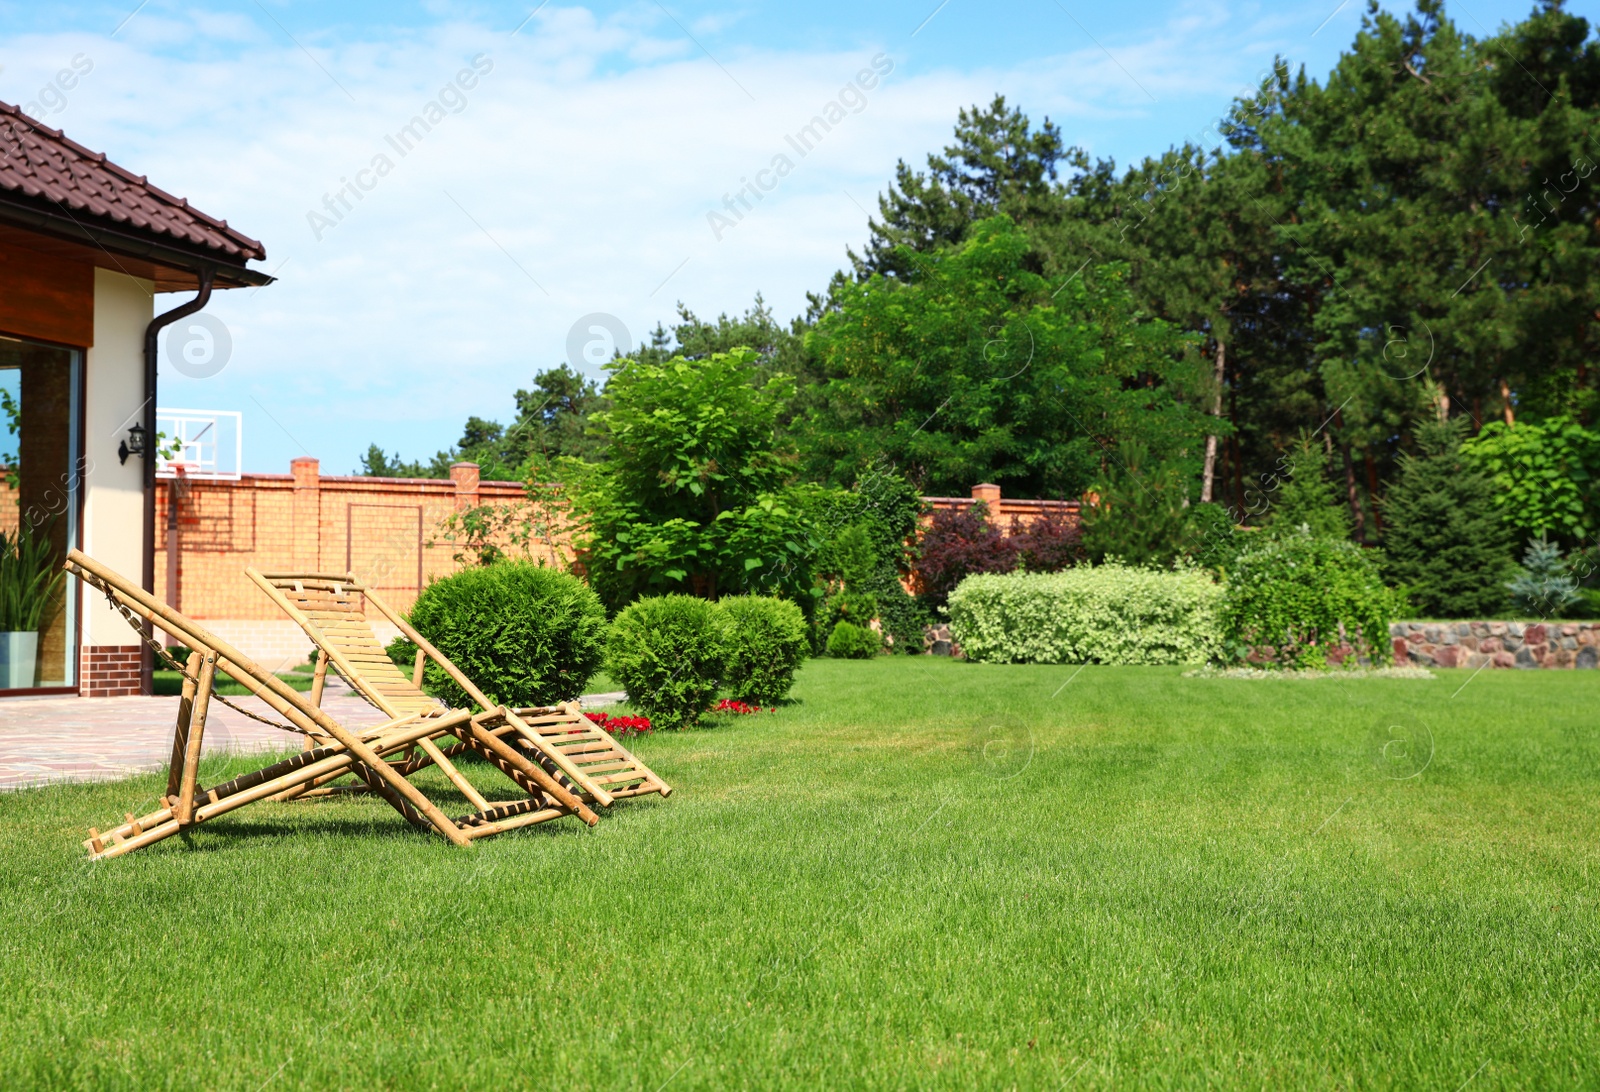 Photo of Wooden deck chairs in garden on sunny day